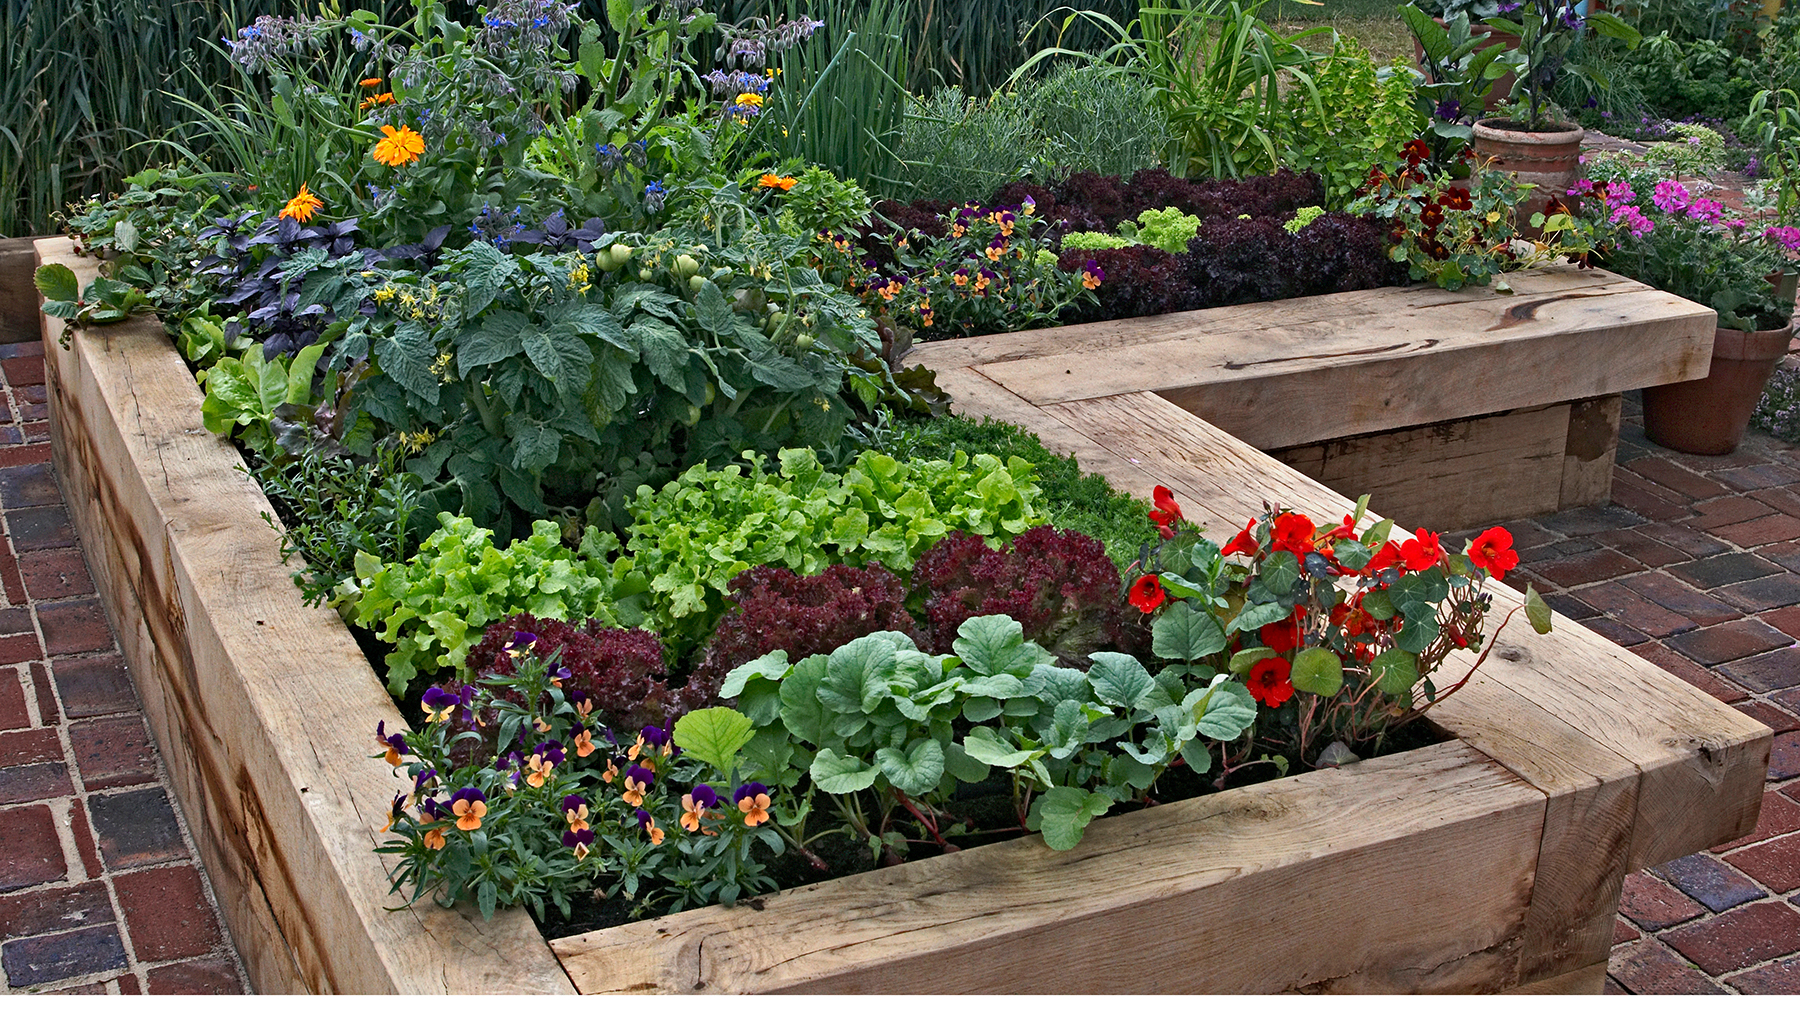 Railway sleeper raised beds planted with vegetables